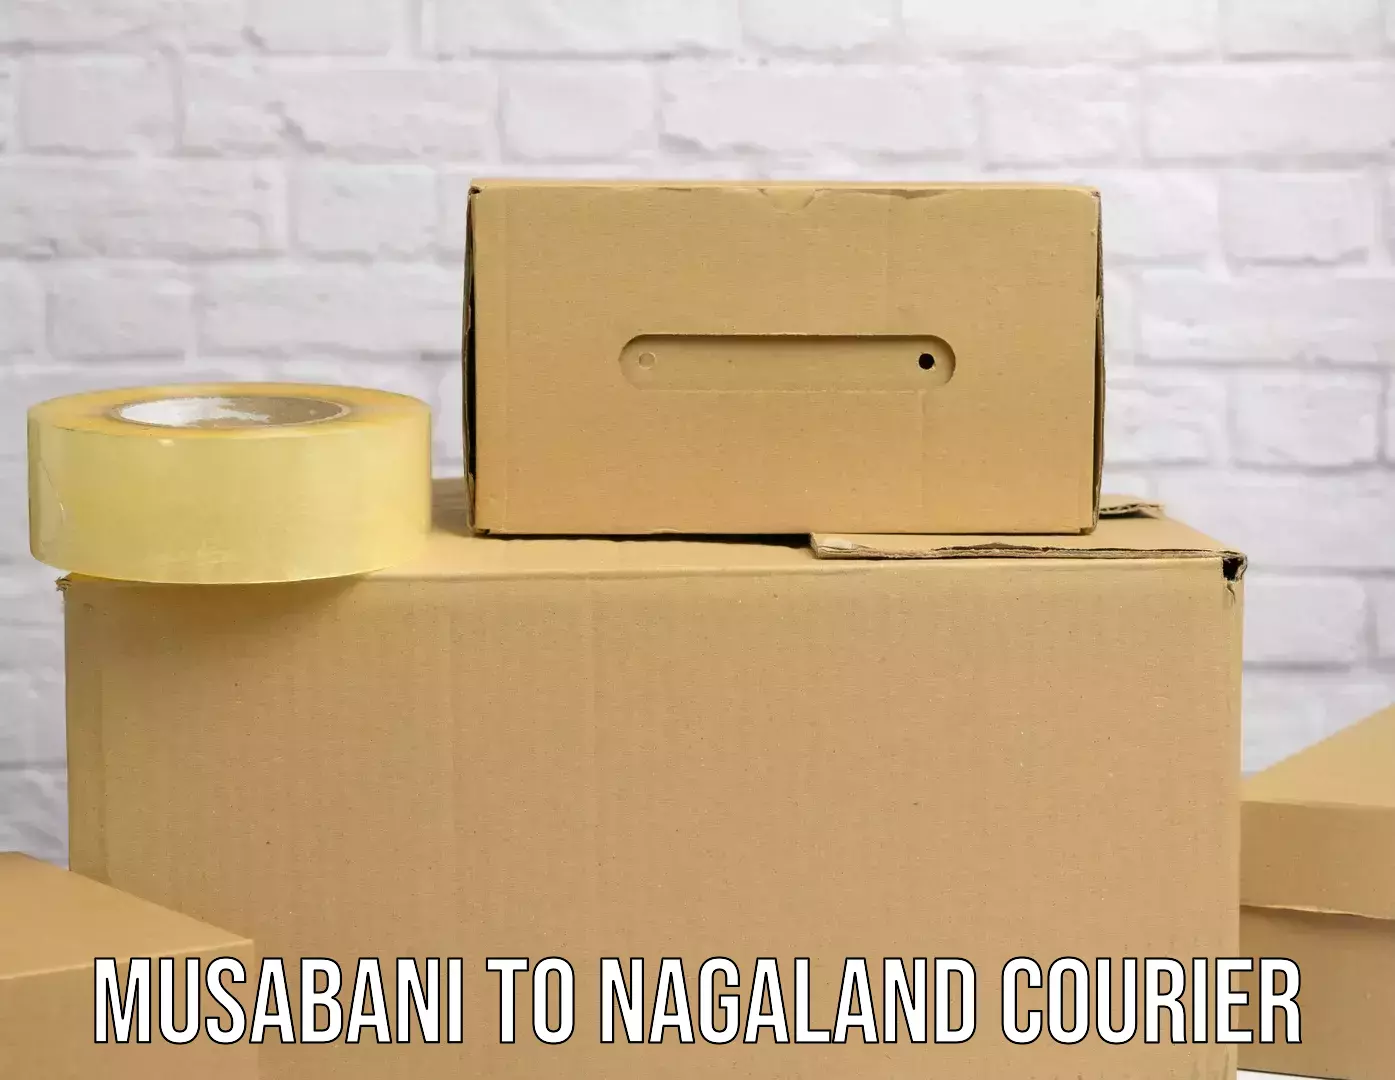 Supply chain delivery in Musabani to Nagaland